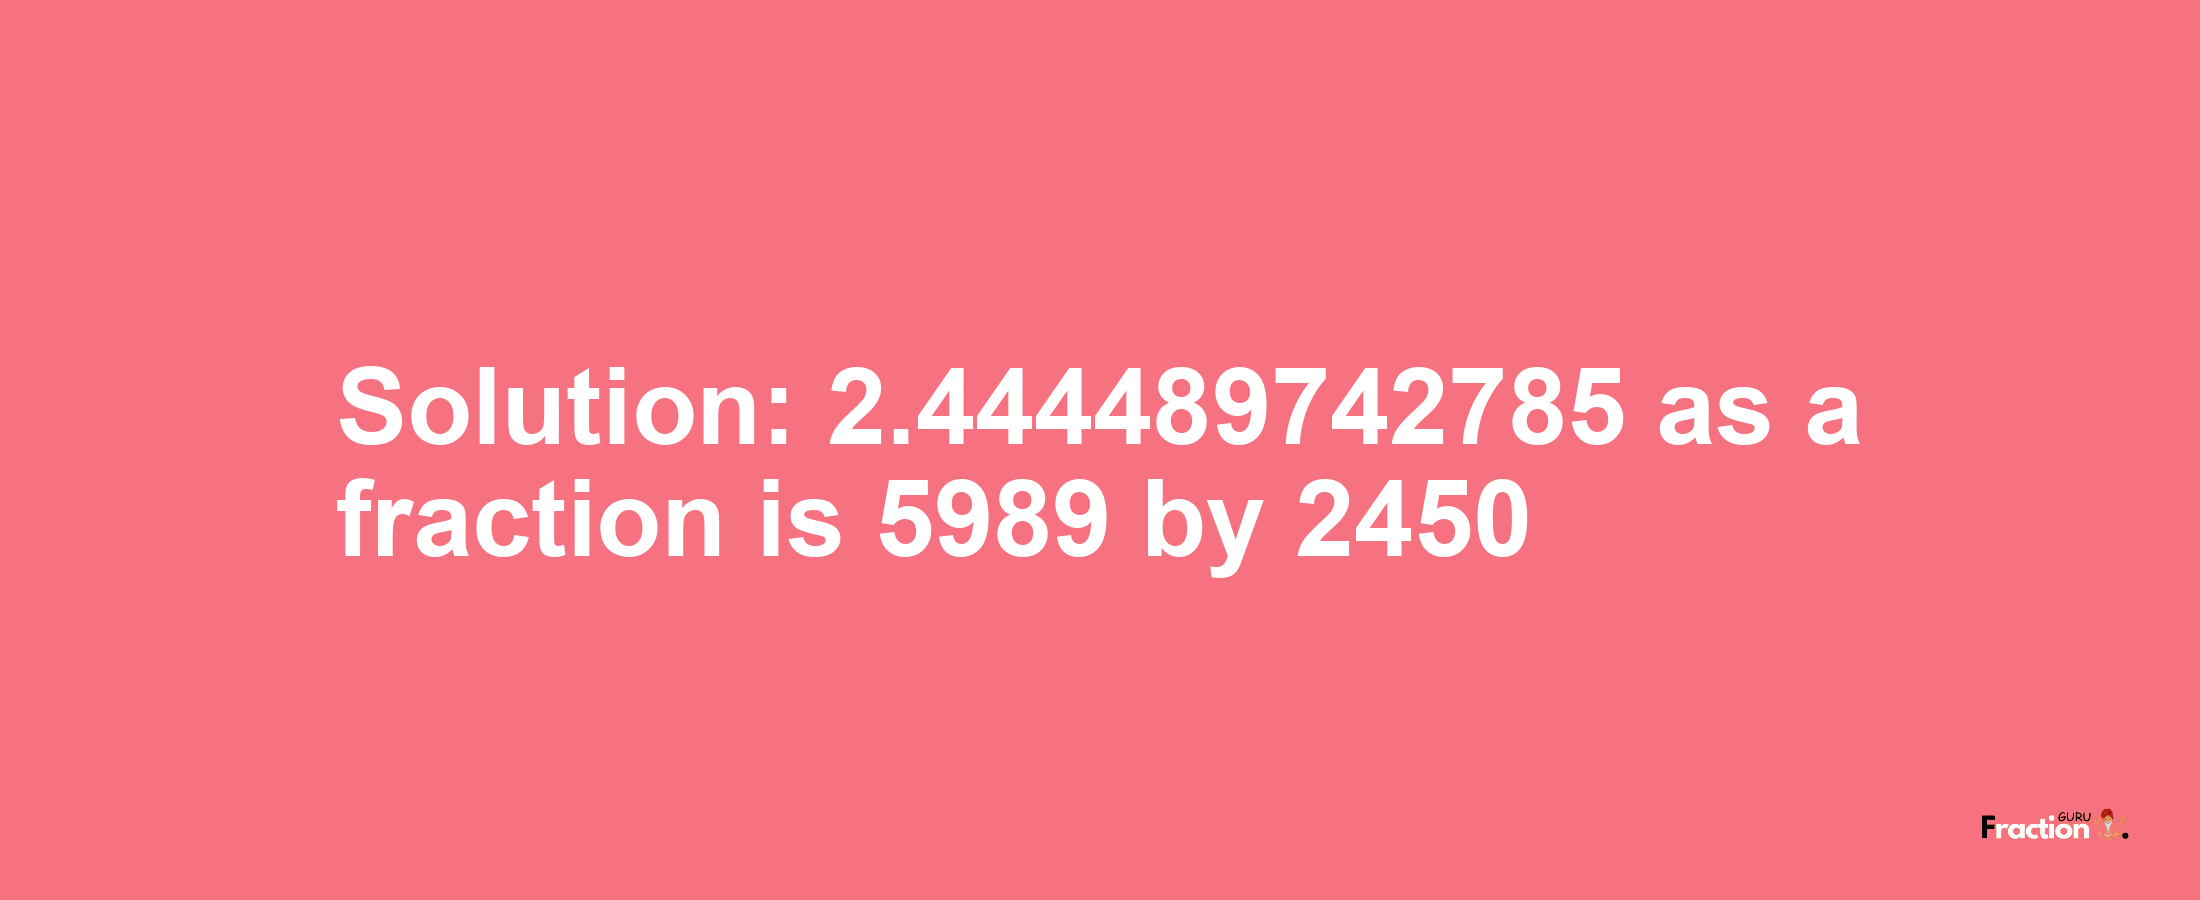 Solution:2.444489742785 as a fraction is 5989/2450